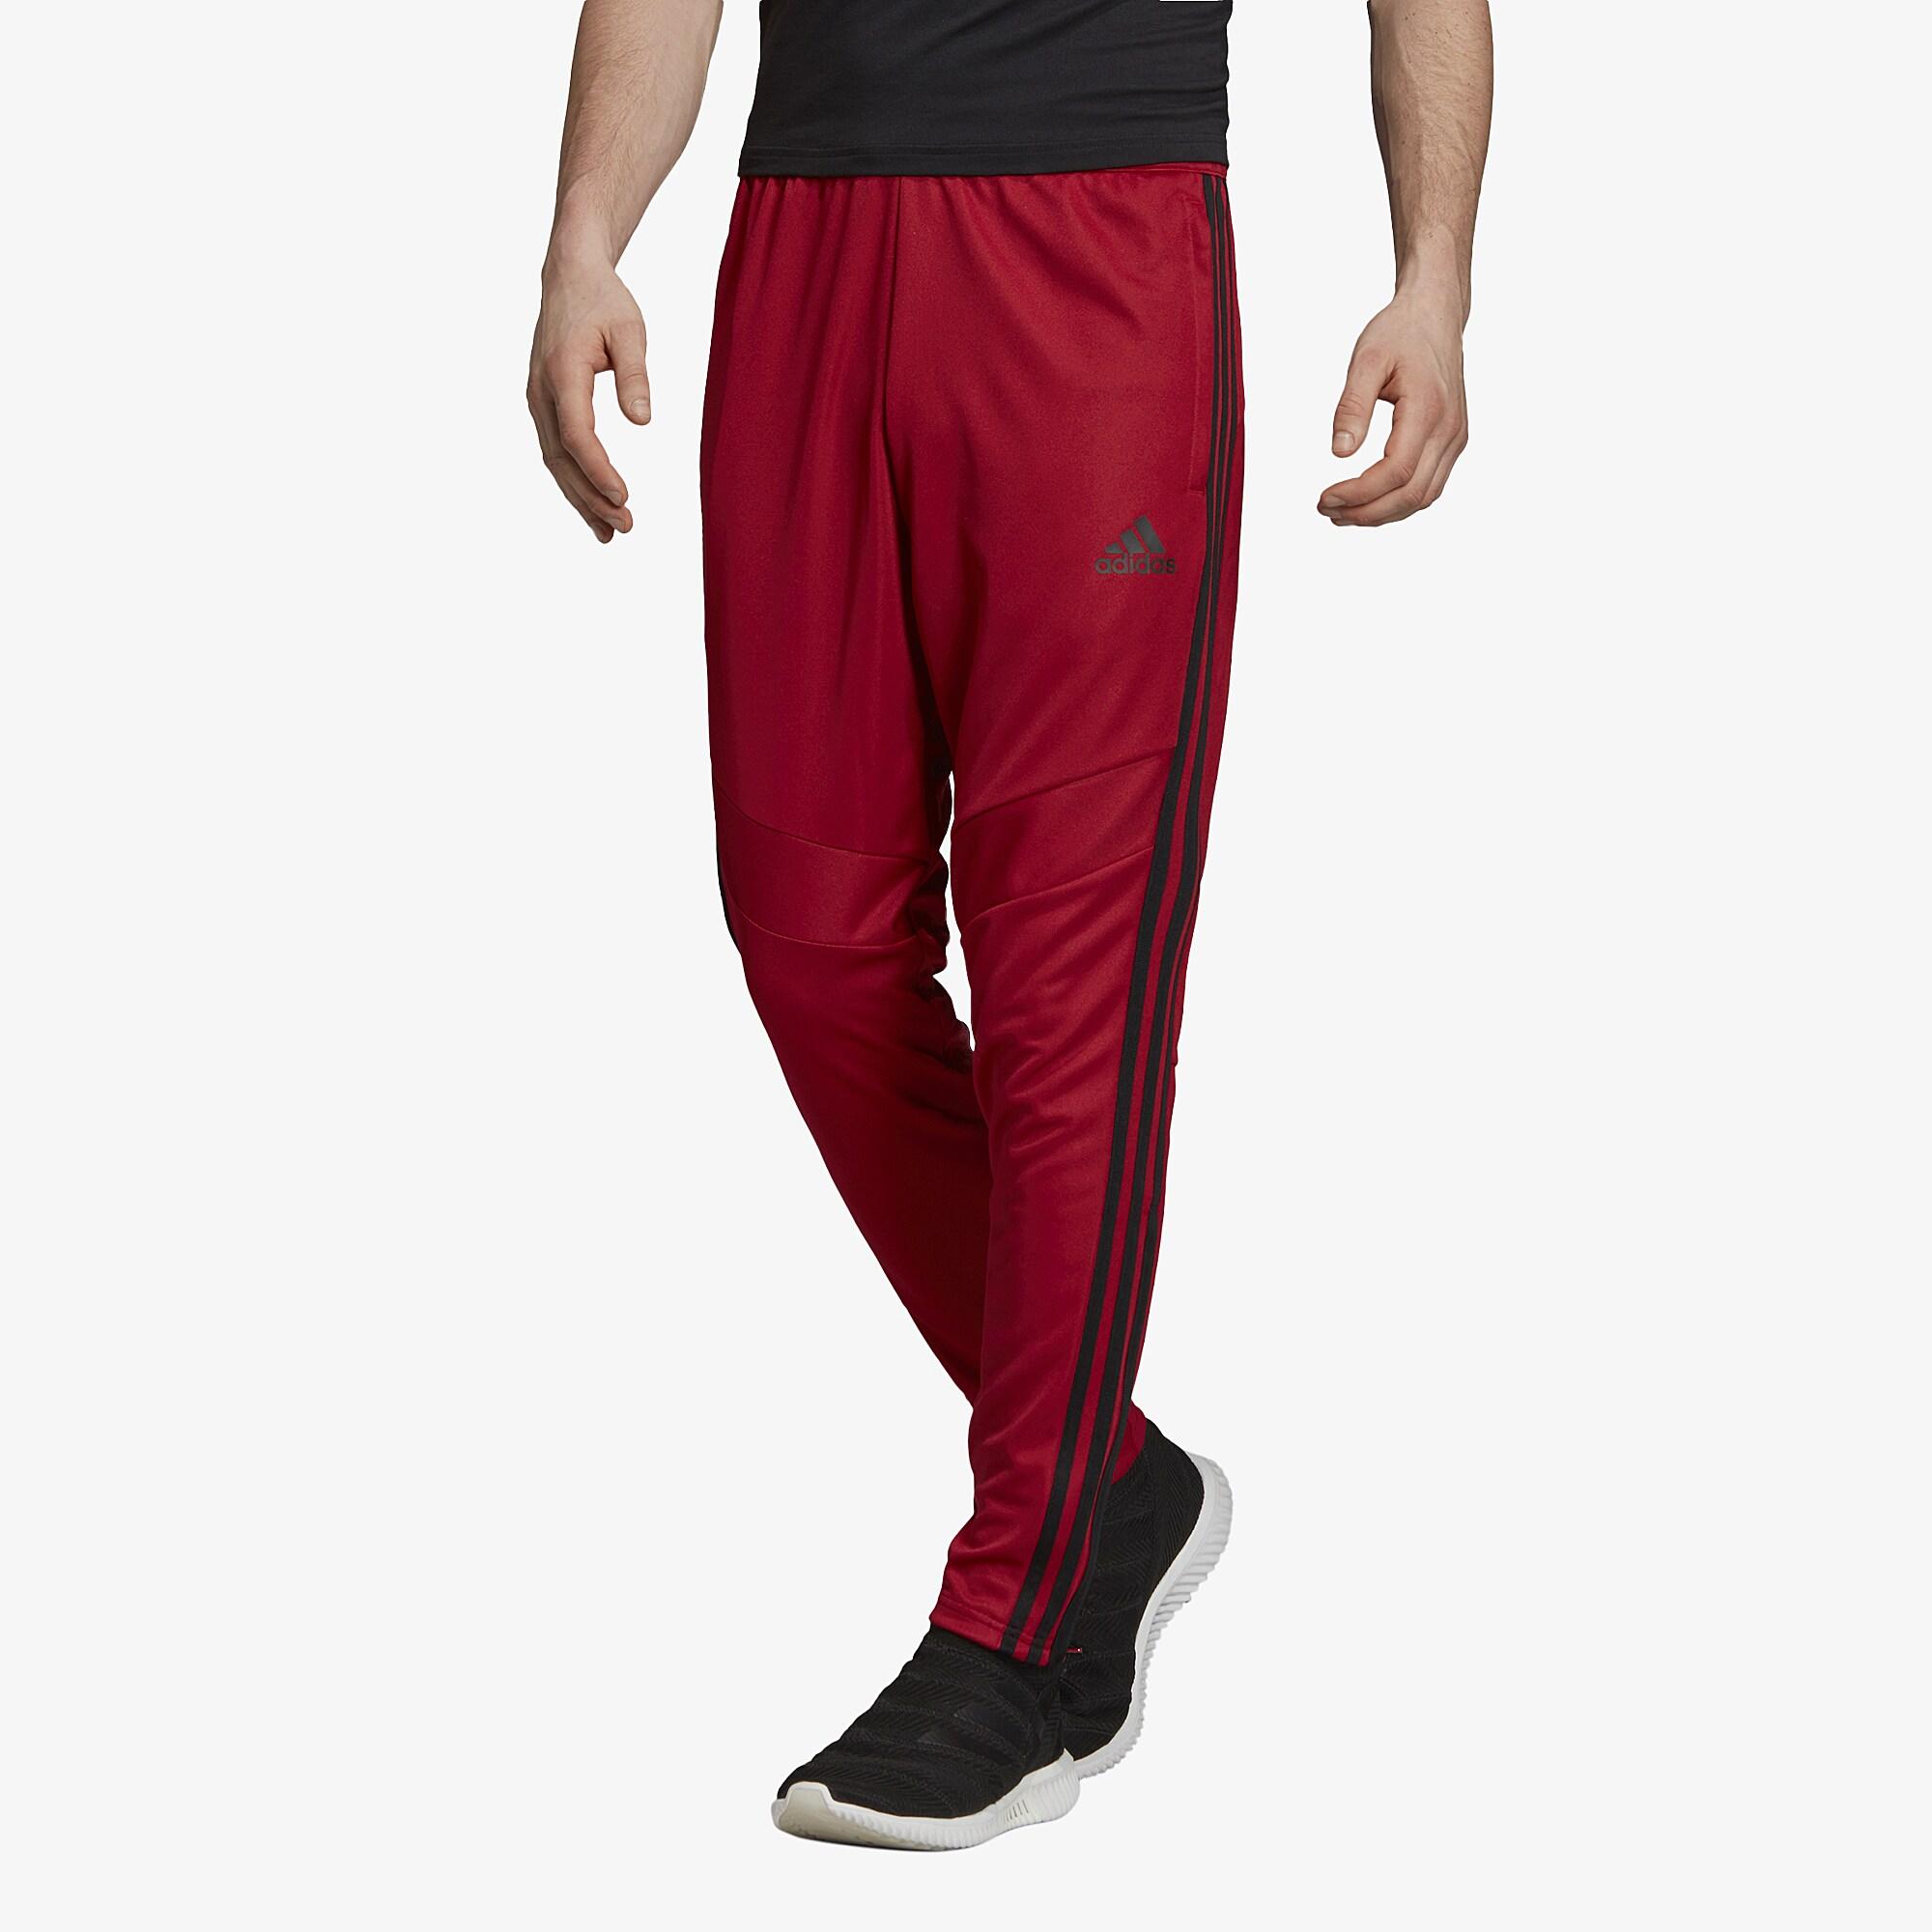 adidas Synthetic Tiro 19 Pants in Red for Men - Lyst